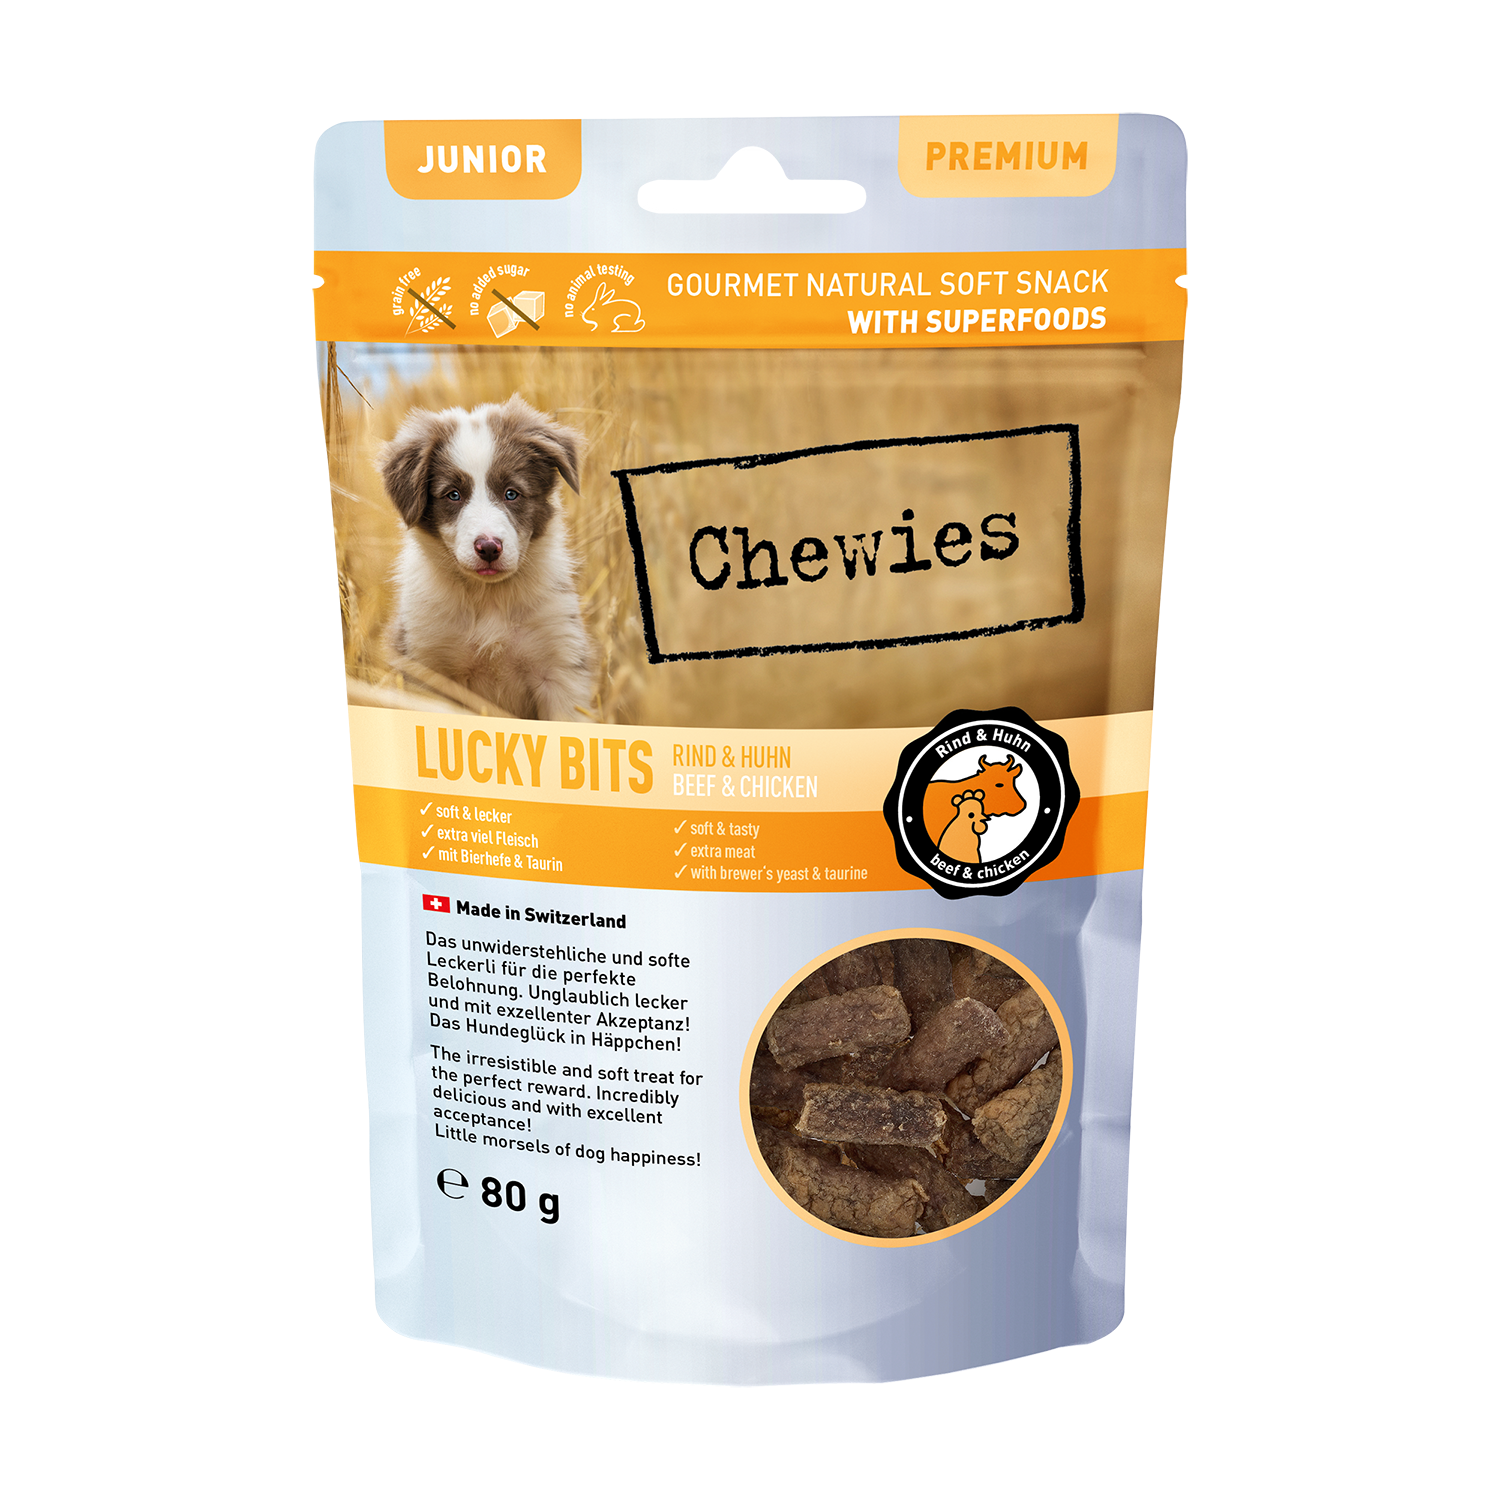 Chewies LUCKY BITS Rind & Huhn Junior 80g